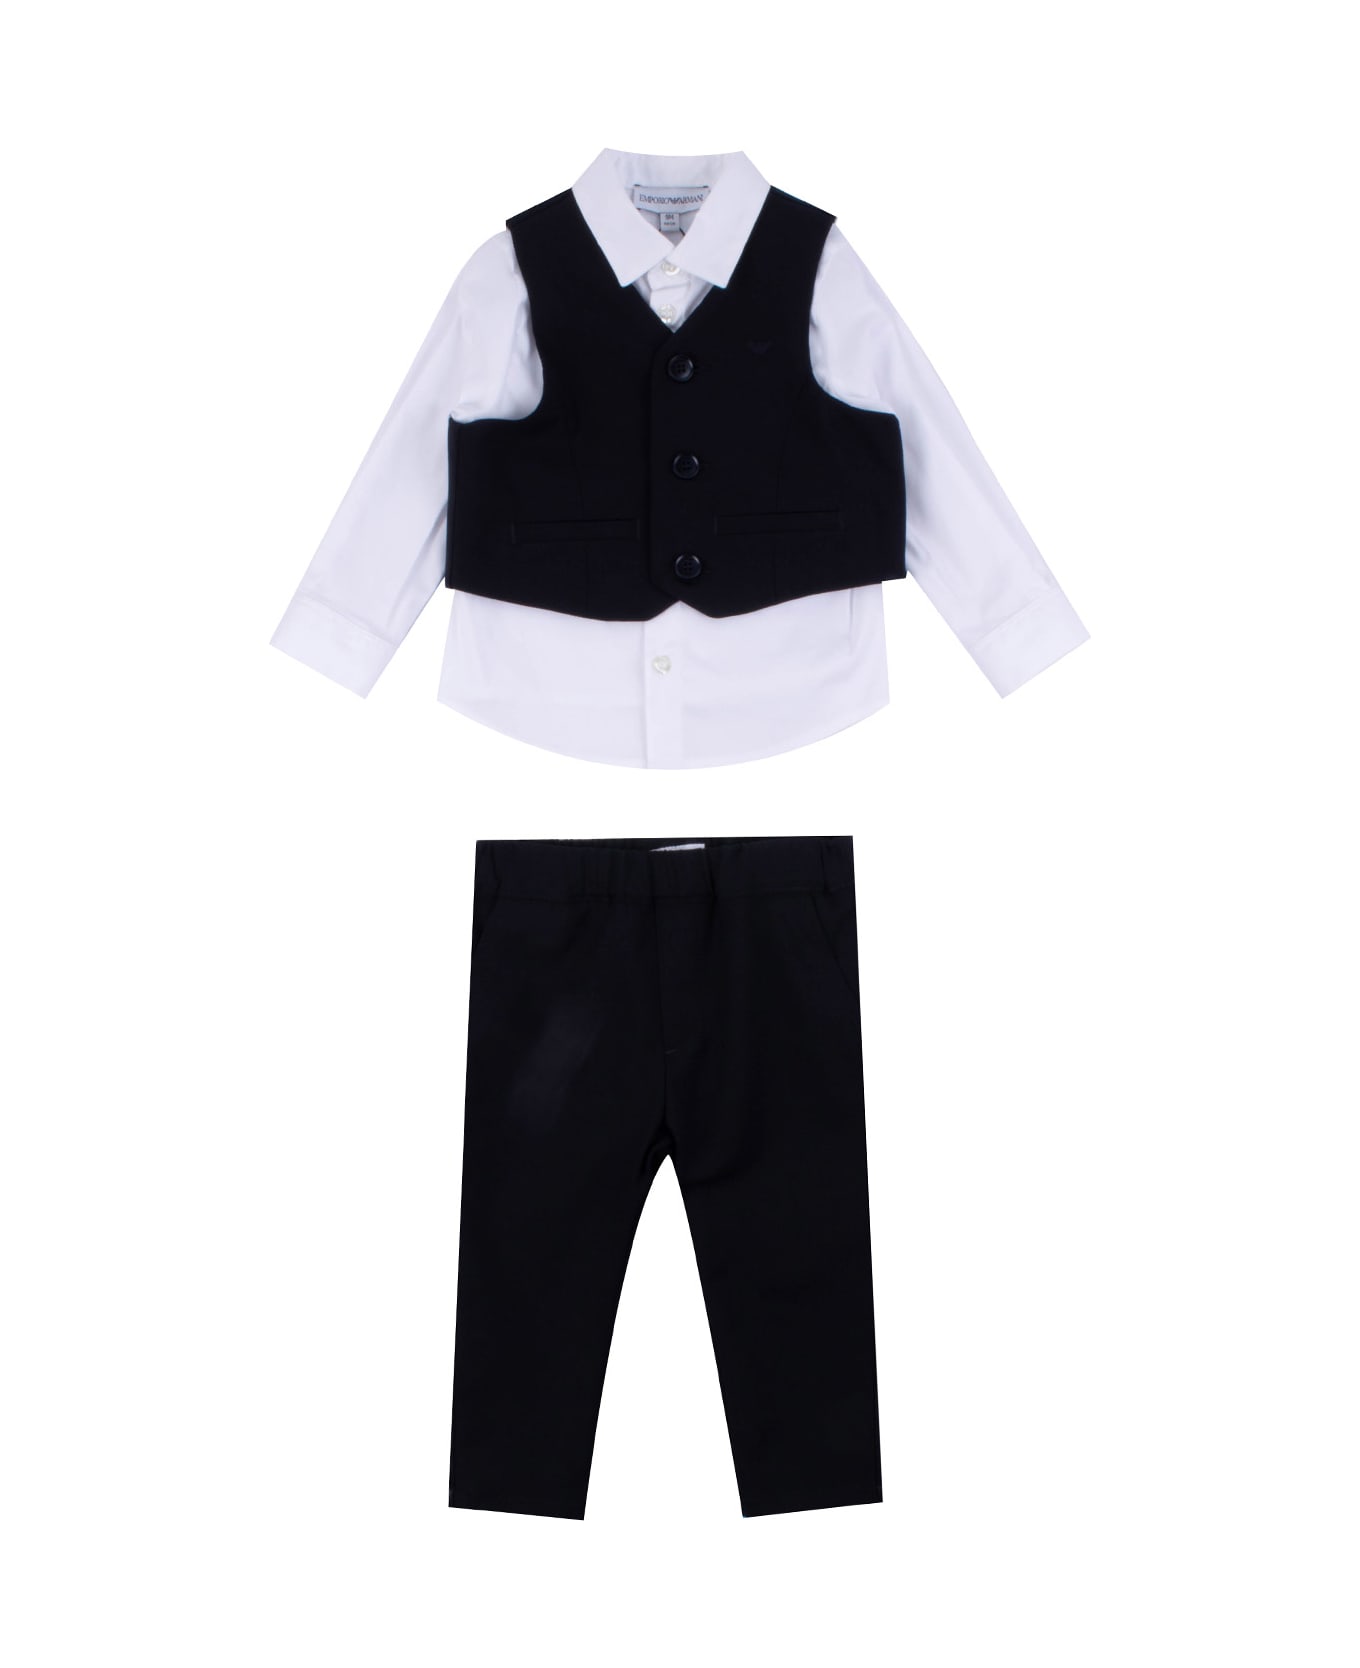 Emporio Armani Cotton Vest, Shirt And Pants - Back ボディスーツ＆セットアップ